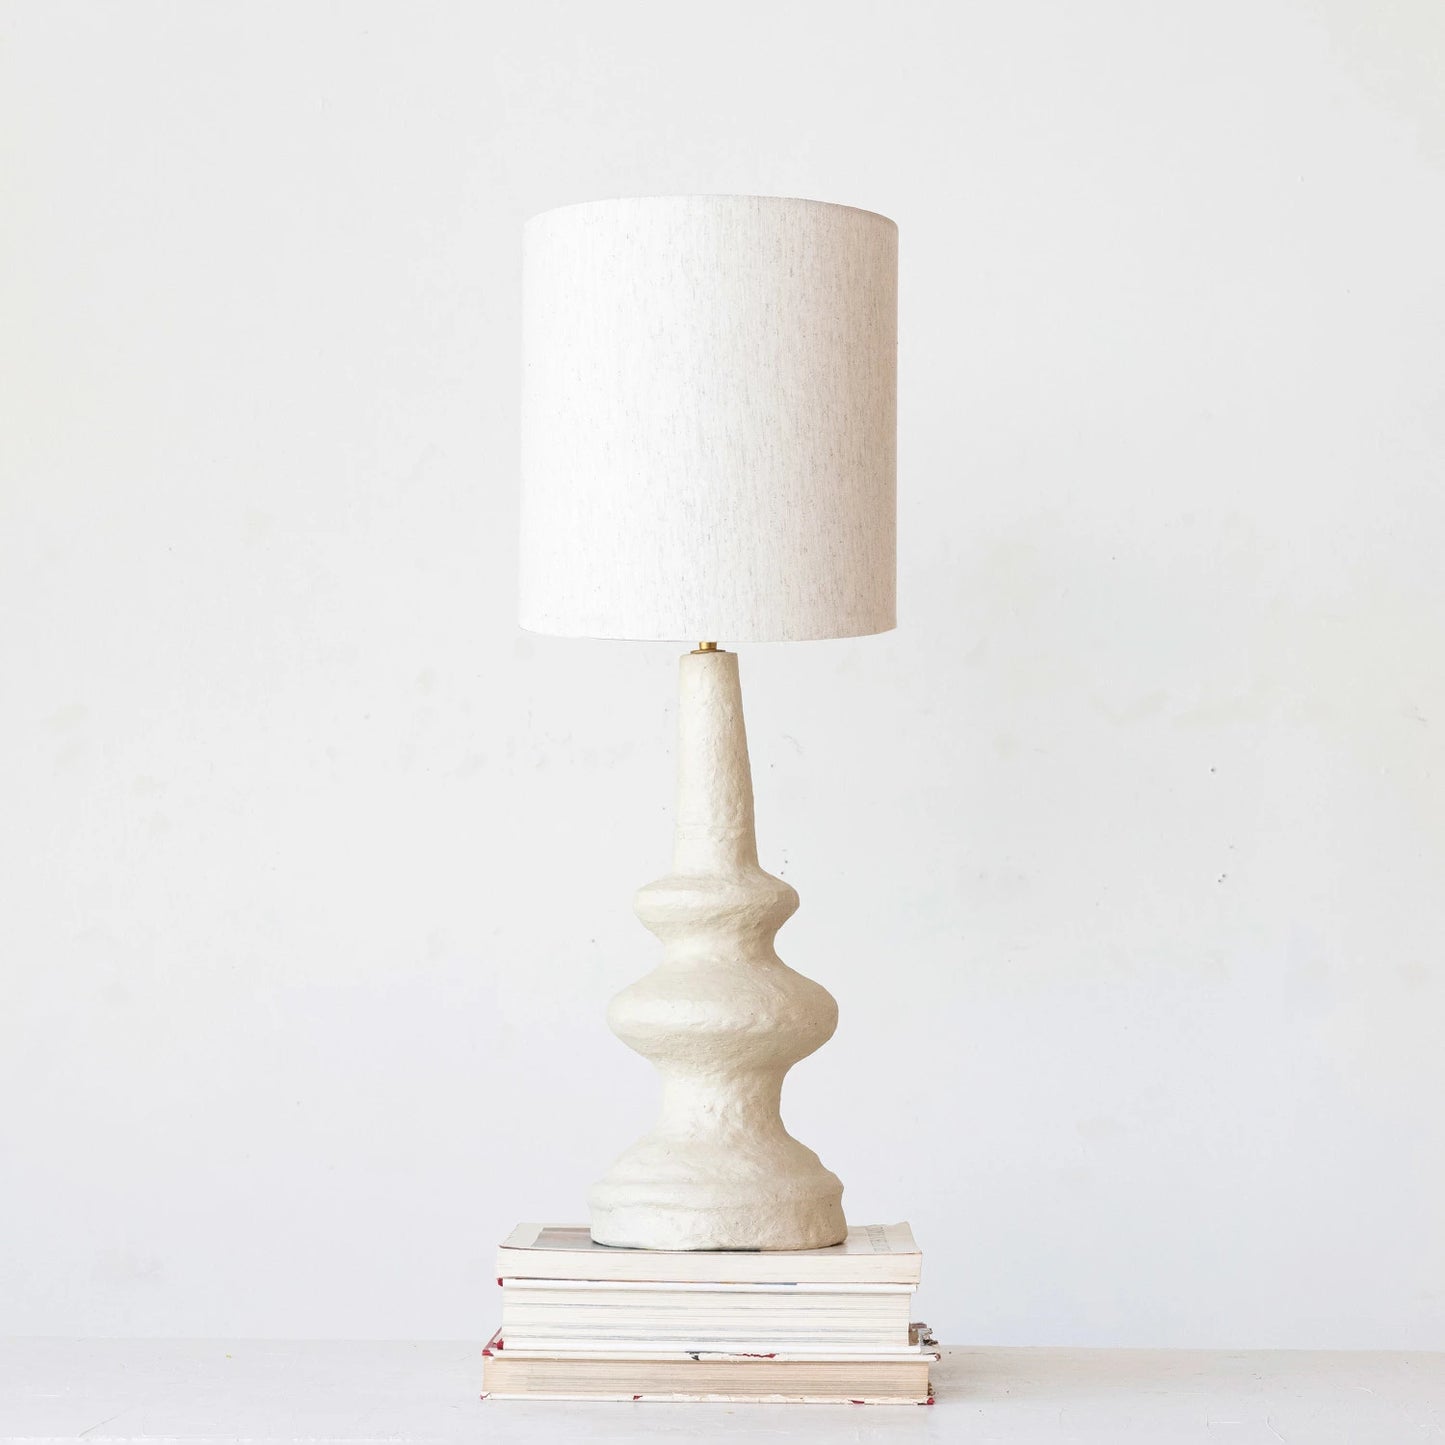 Handmade Paper Mache Table Lamp with Cotton Shade - Japandi Collection - #8981